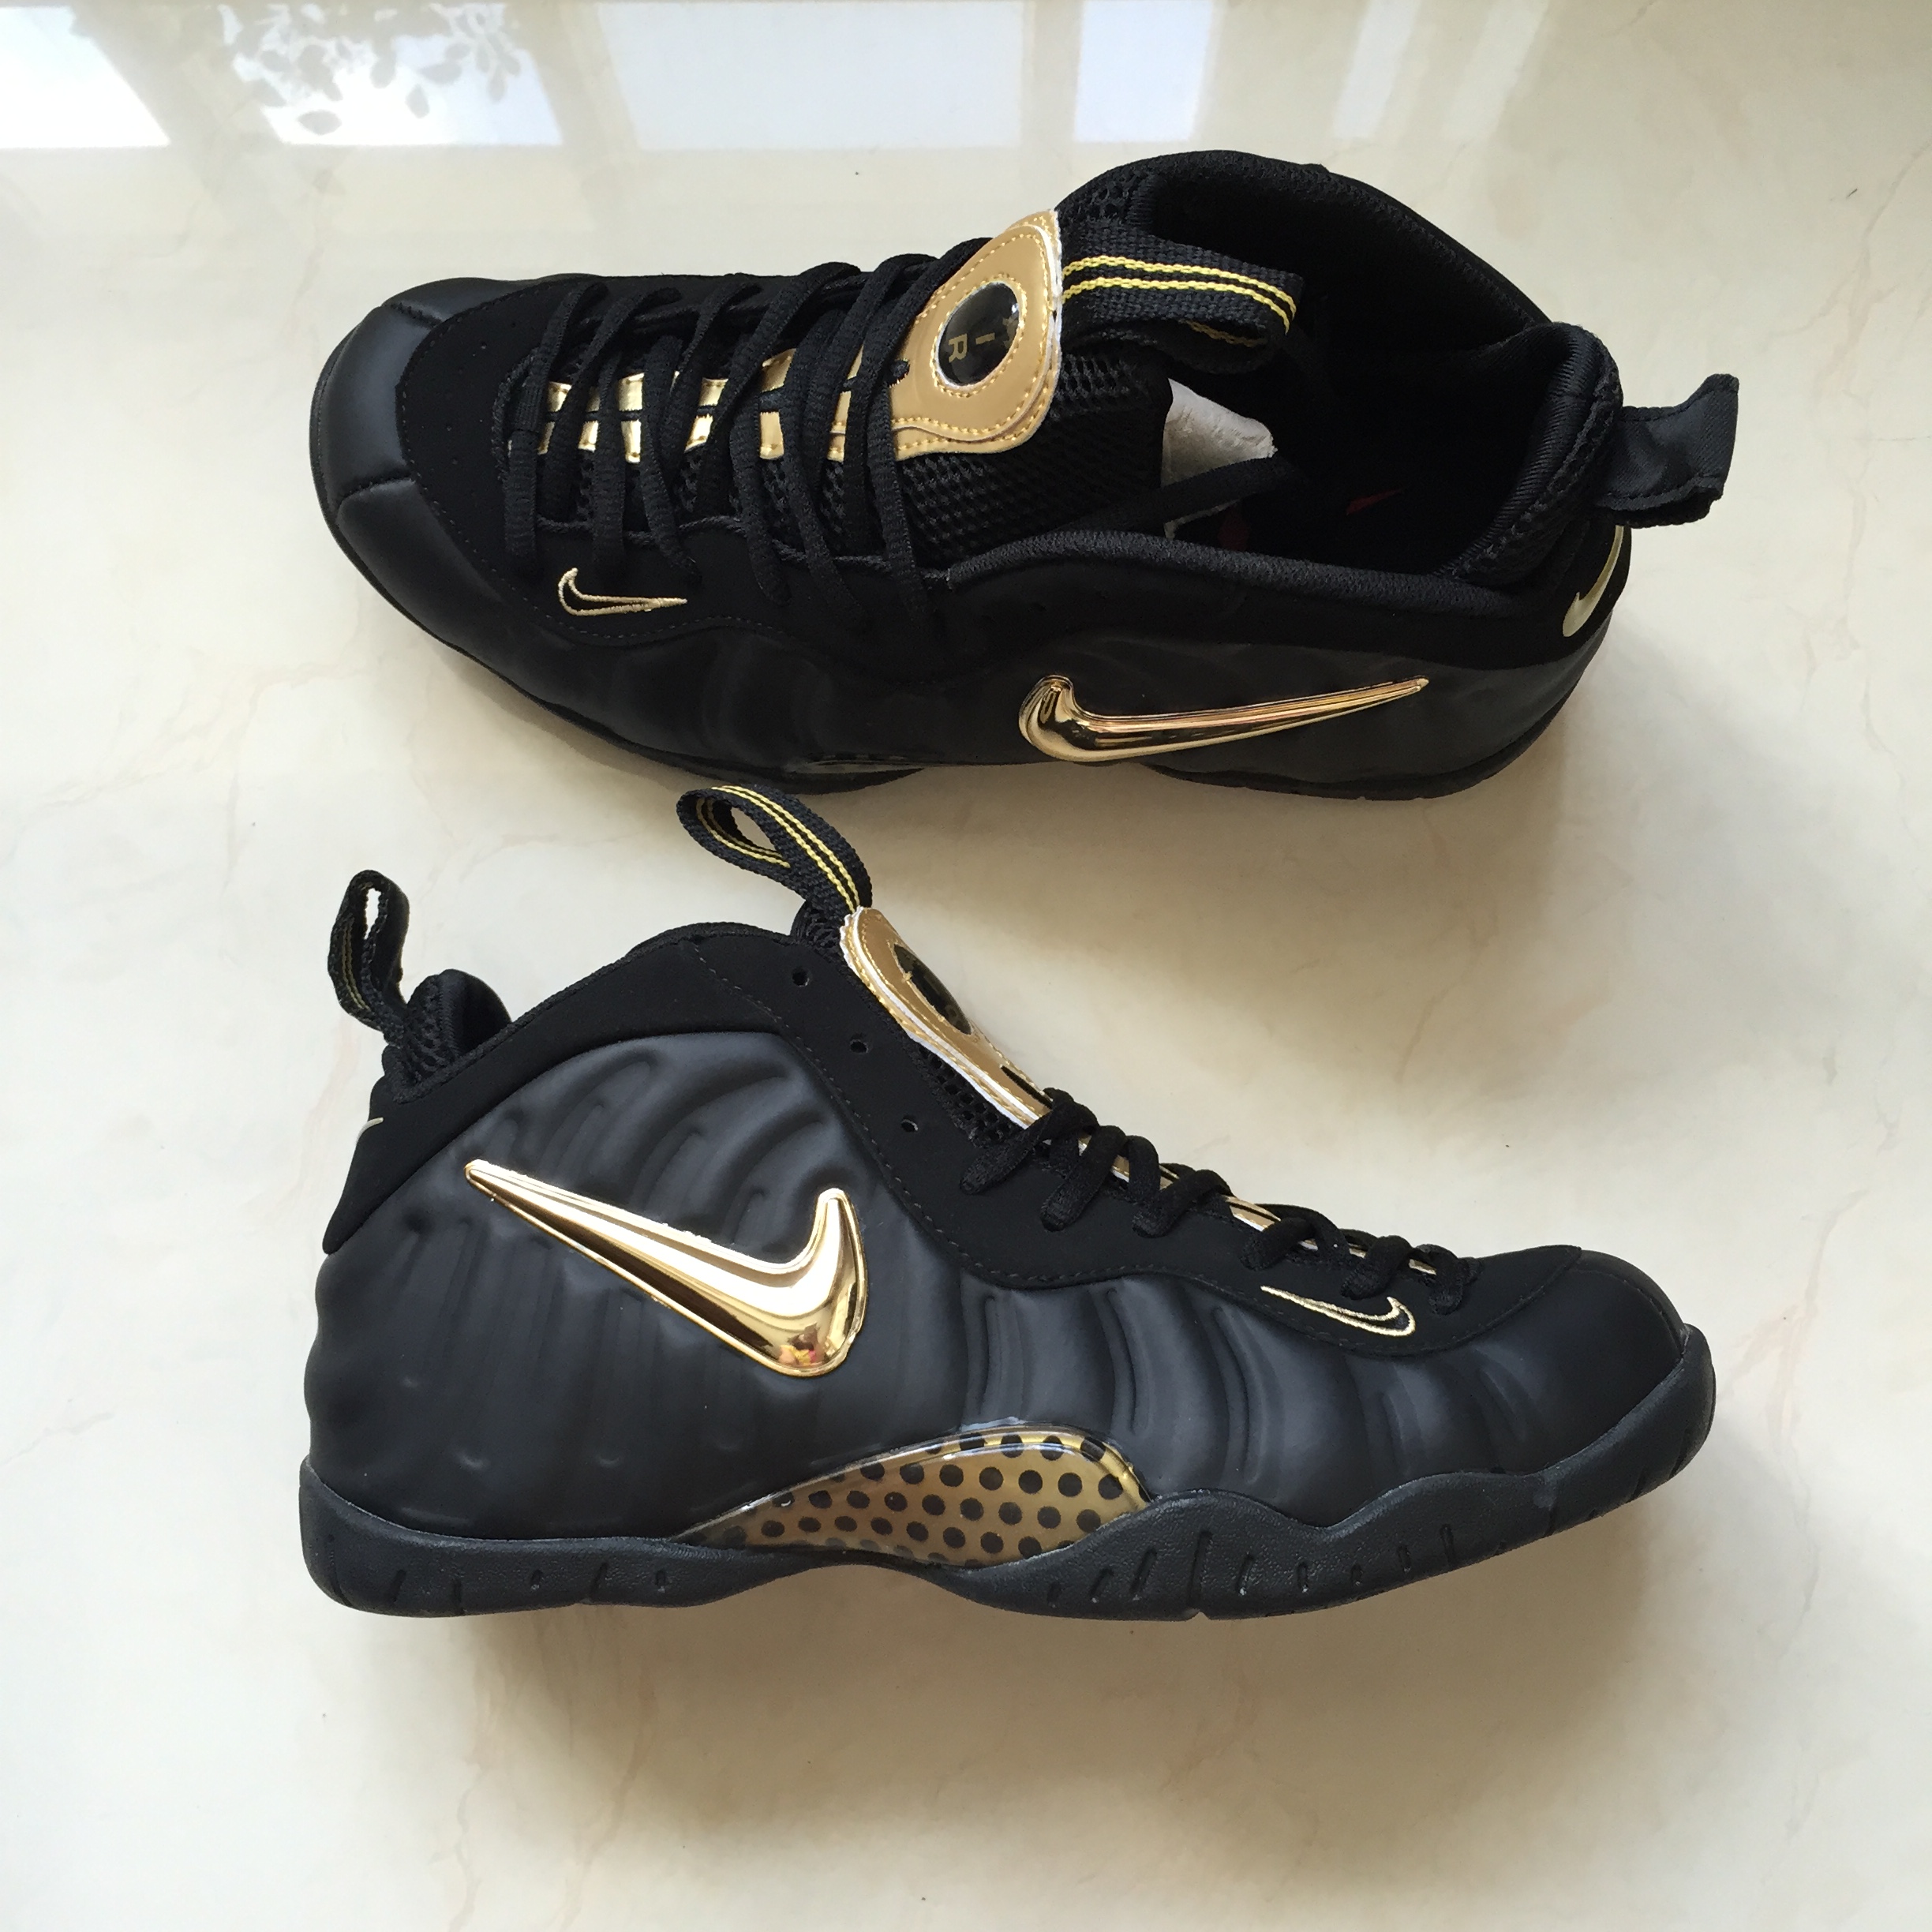 New Nike Air Foamposite Pro Black Gold Shoes